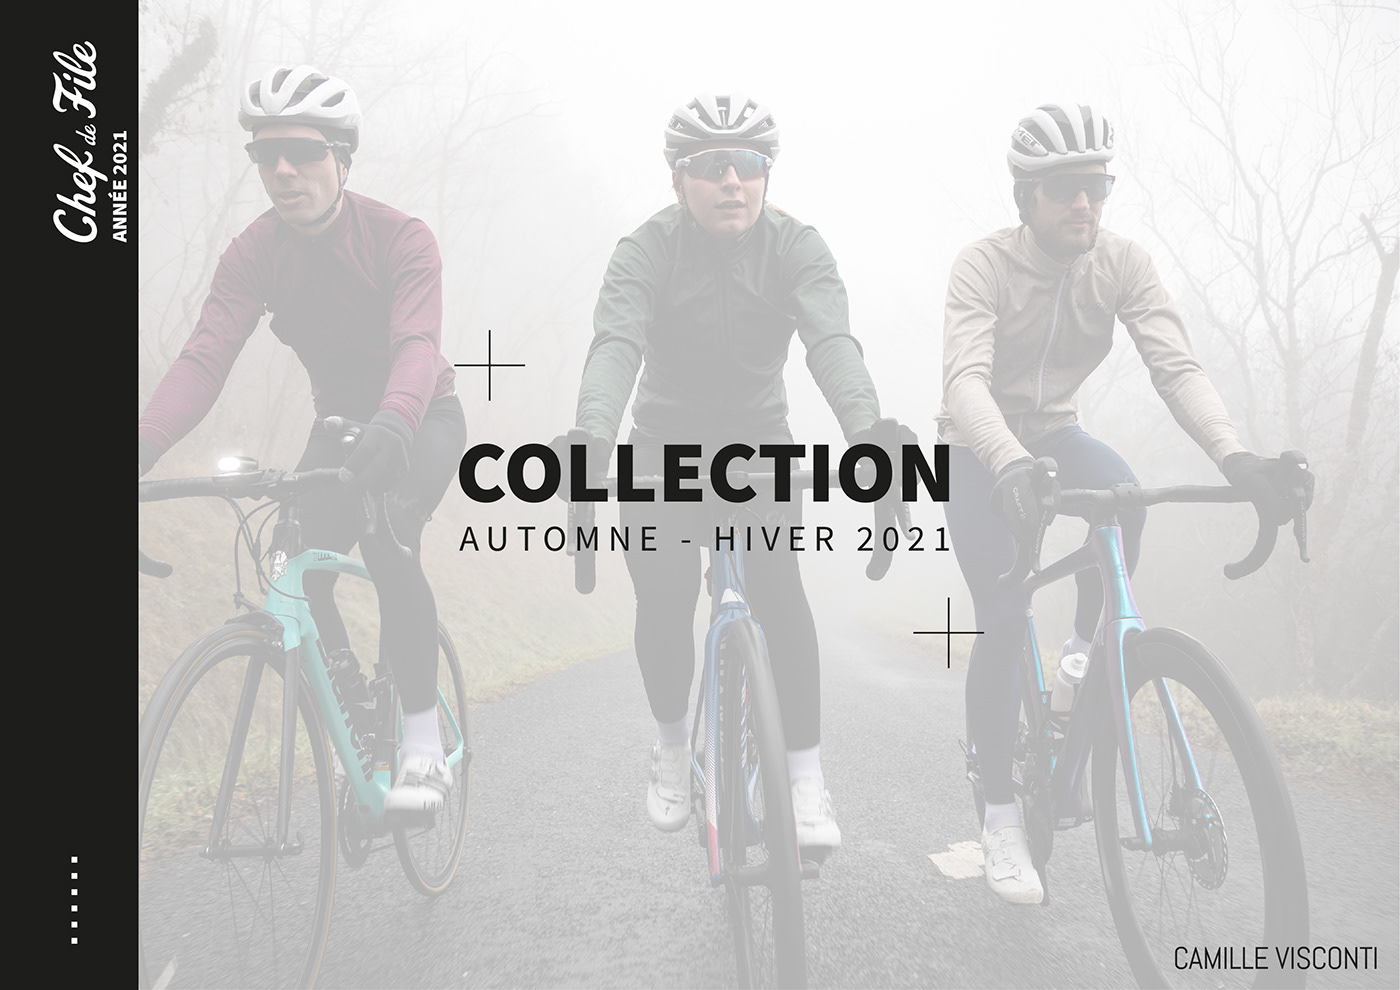 Cycling cycling jersey cycling design cycling kit Cycling Apparel Cycling apparel design Sportswear fall winter Collection graphic design 